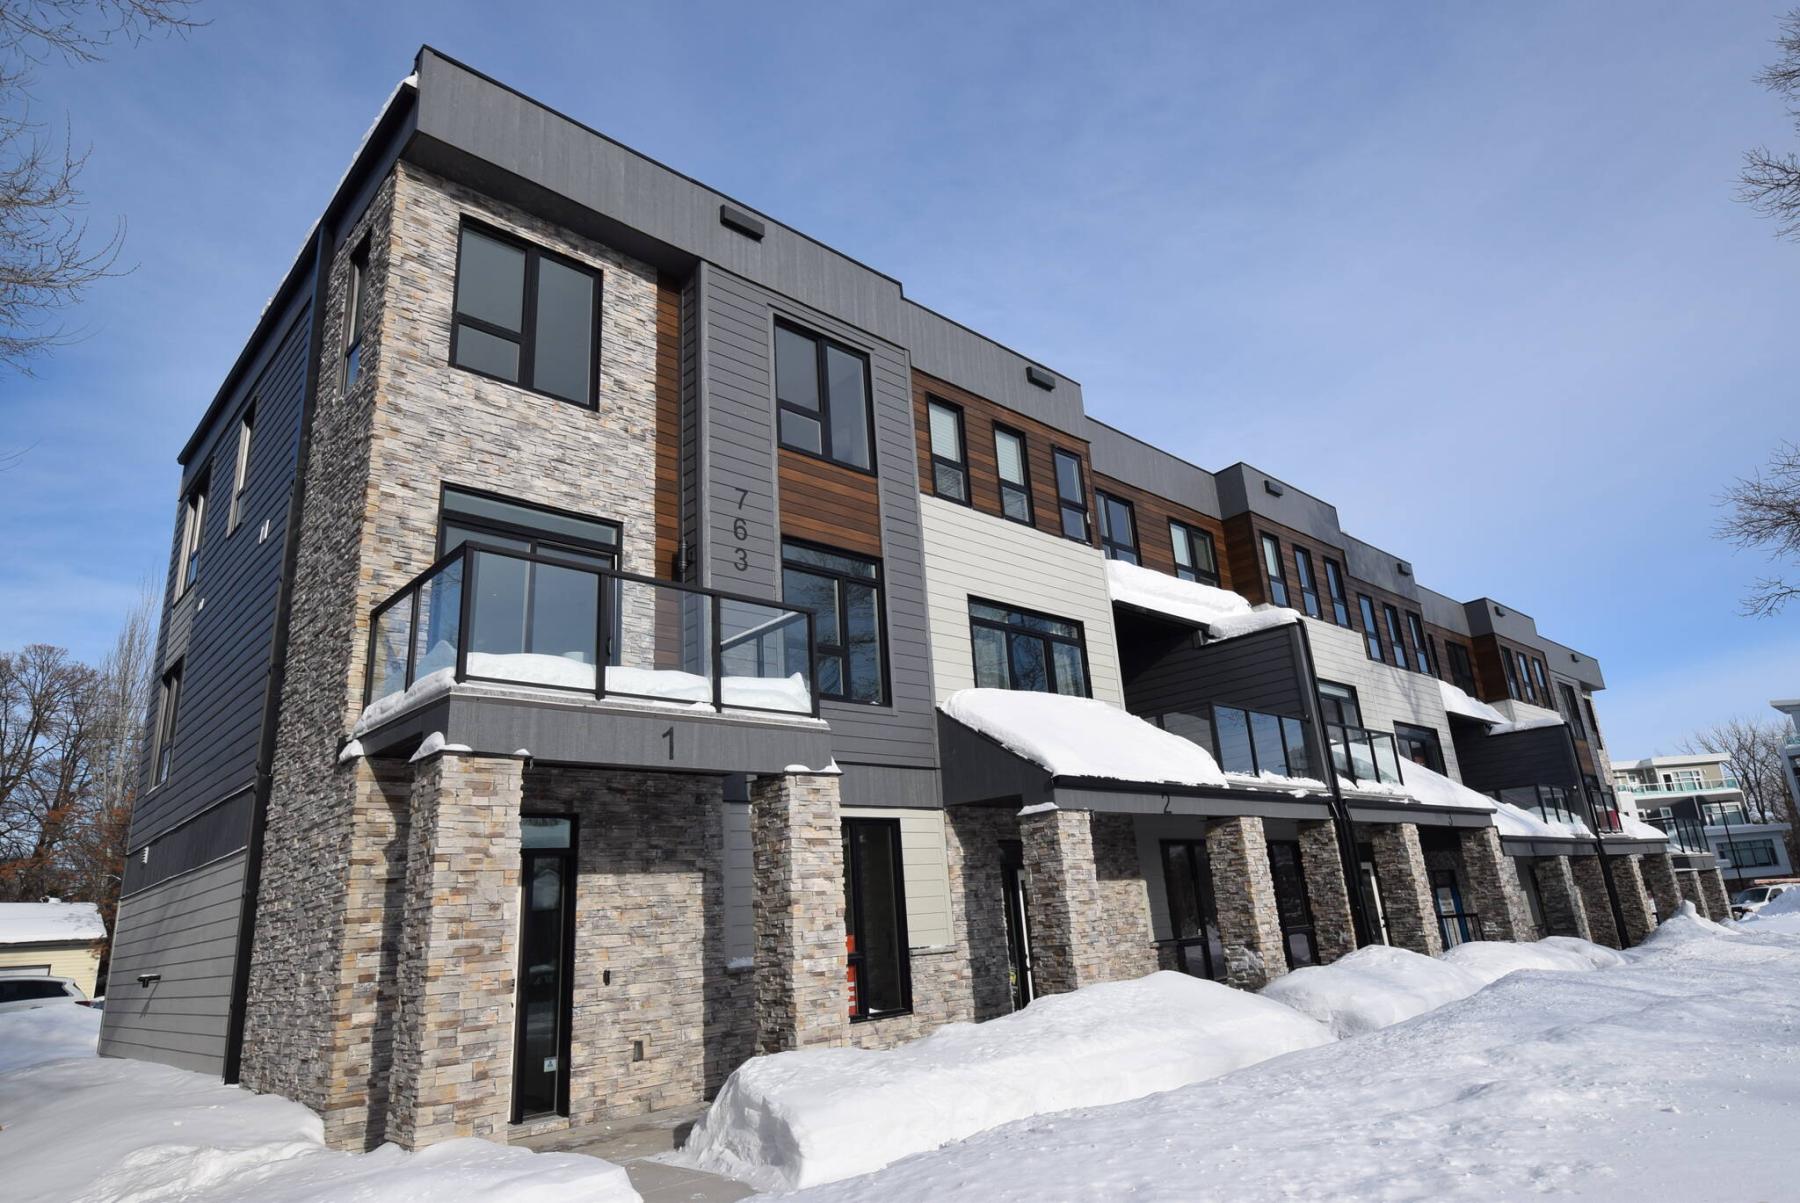  <p>Situated in a quiet area next to the Red River and mature forest, Aspire at Wildewood Village offers spacious, well-designed townhomes.</p> 